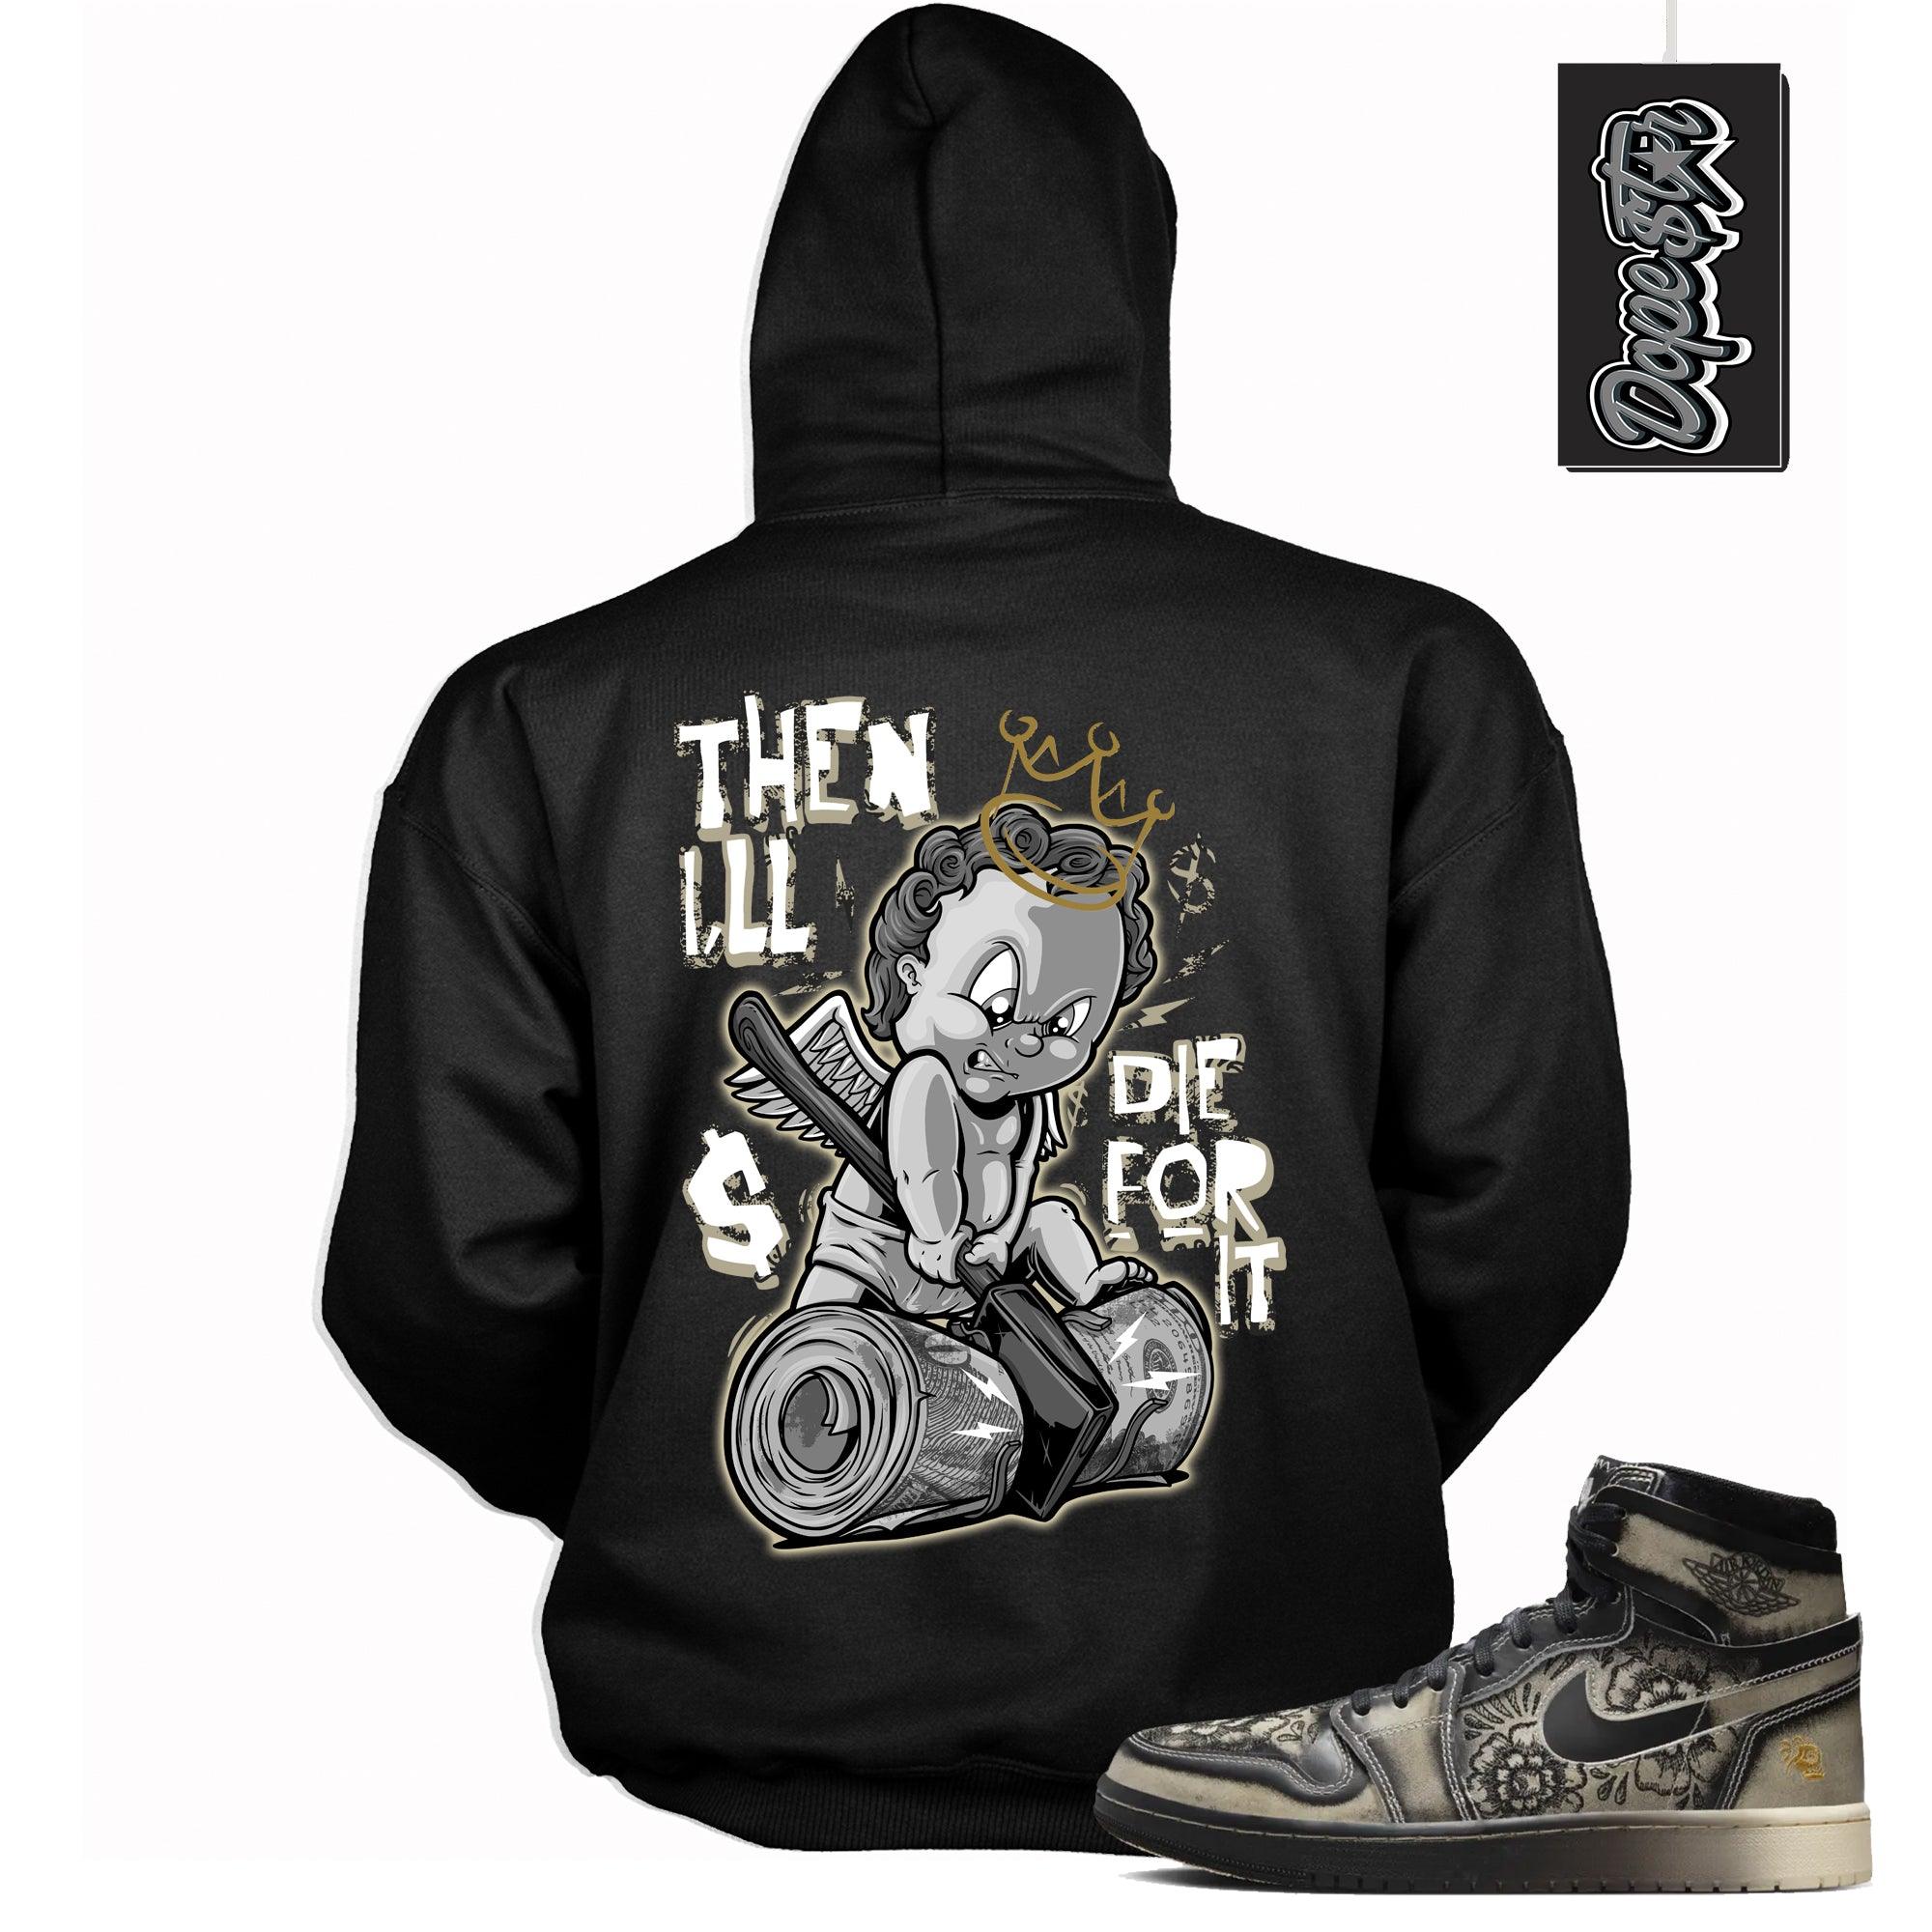 Cool Black Graphic Hoodie with “ Then I’ll 2 “ print, that perfectly matches Air Jordan 1 High Zoom Comfort 2 Dia de Muertos Black and Pale Ivory sneakers